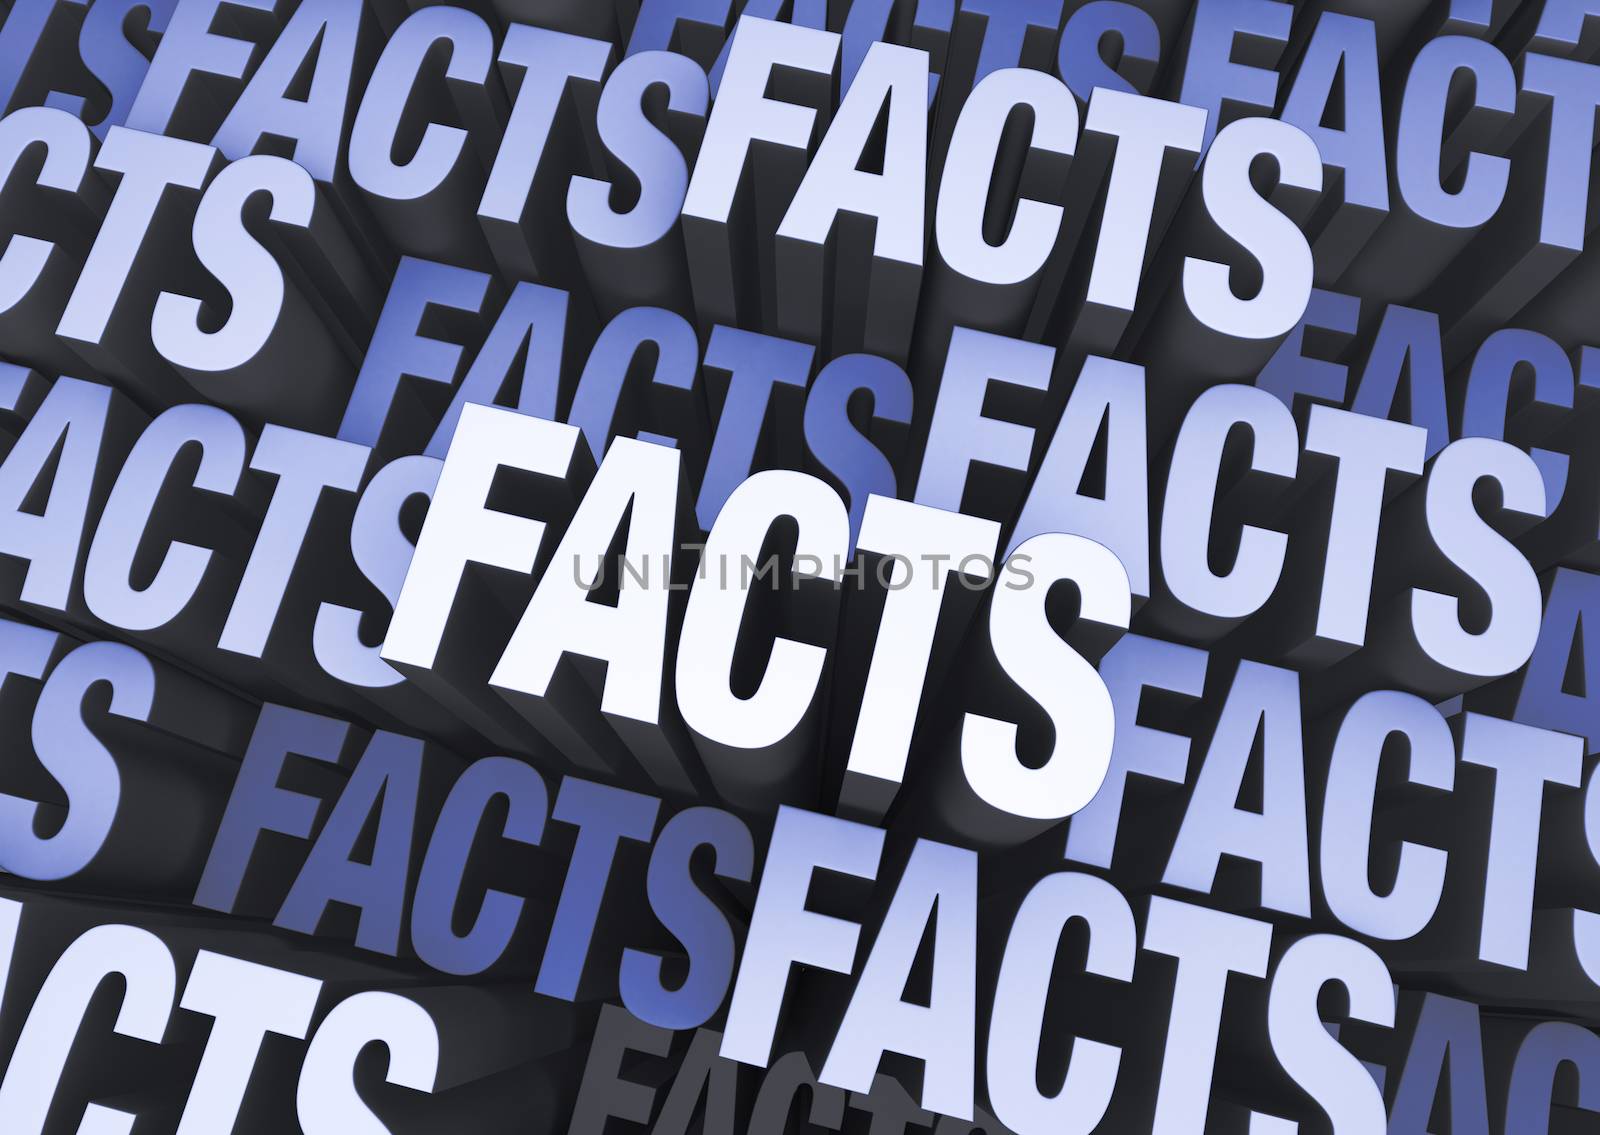 A 3D blue gray background filled with the word "FACTS" repeated many times a different depths.